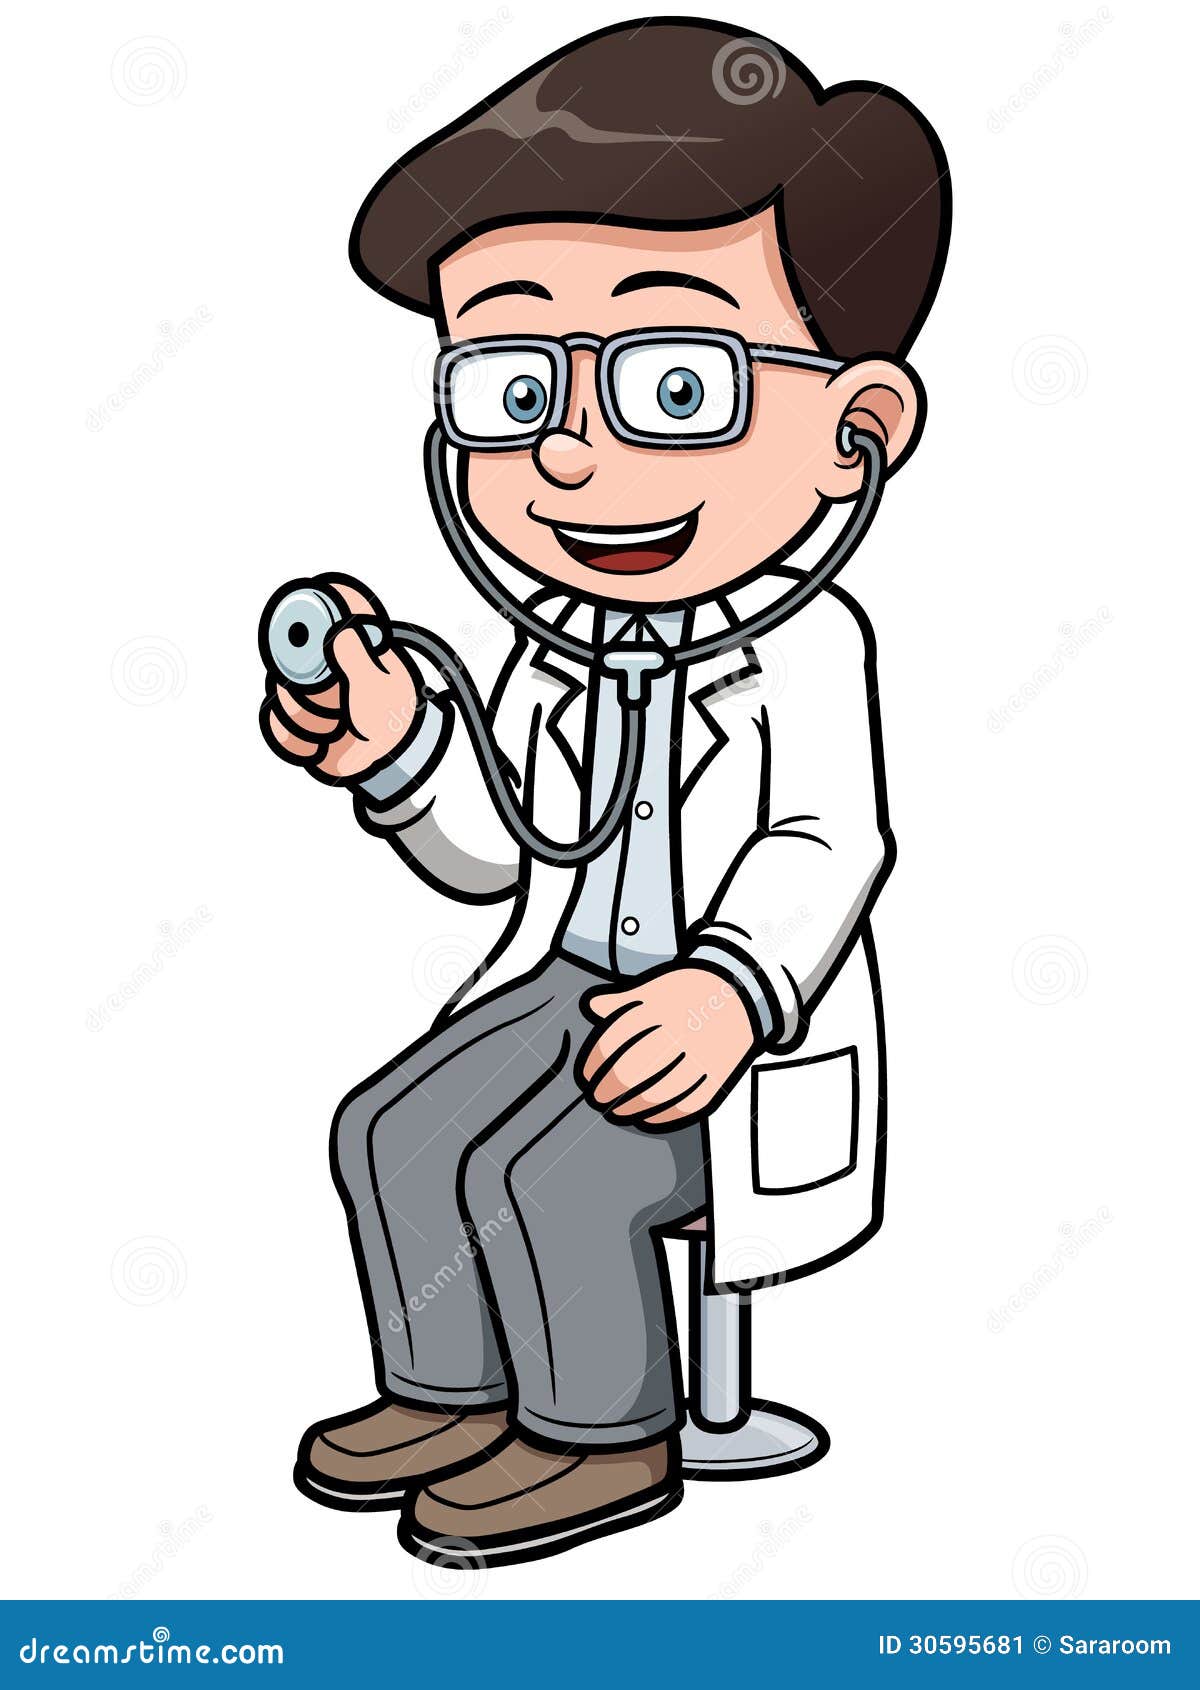 Doctor Cartoon Stethoscope Stock Illustrations – 24,420 Doctor Cartoon  Stethoscope Stock Illustrations, Vectors & Clipart - Dreamstime